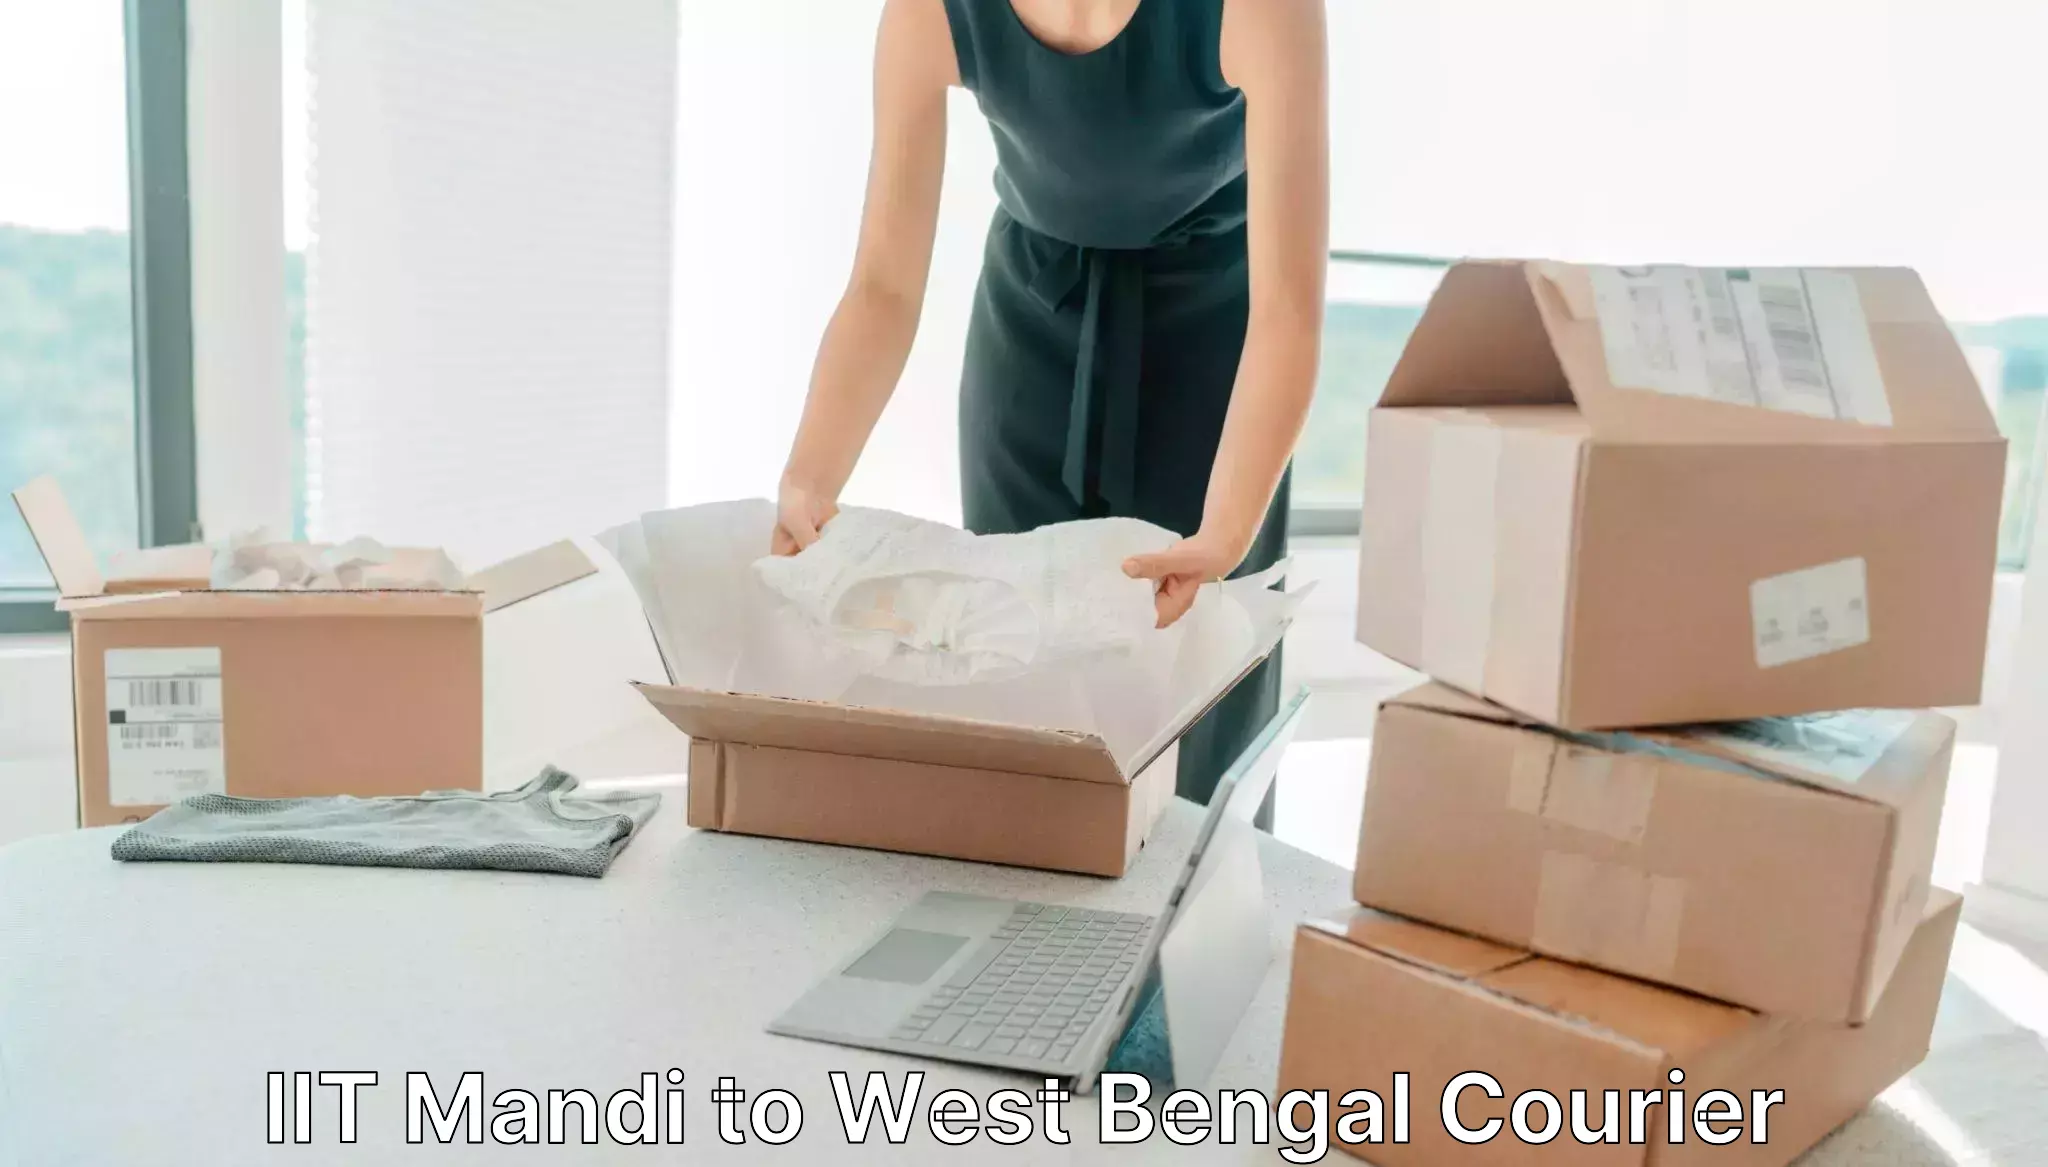 Premium courier solutions in IIT Mandi to West Bengal